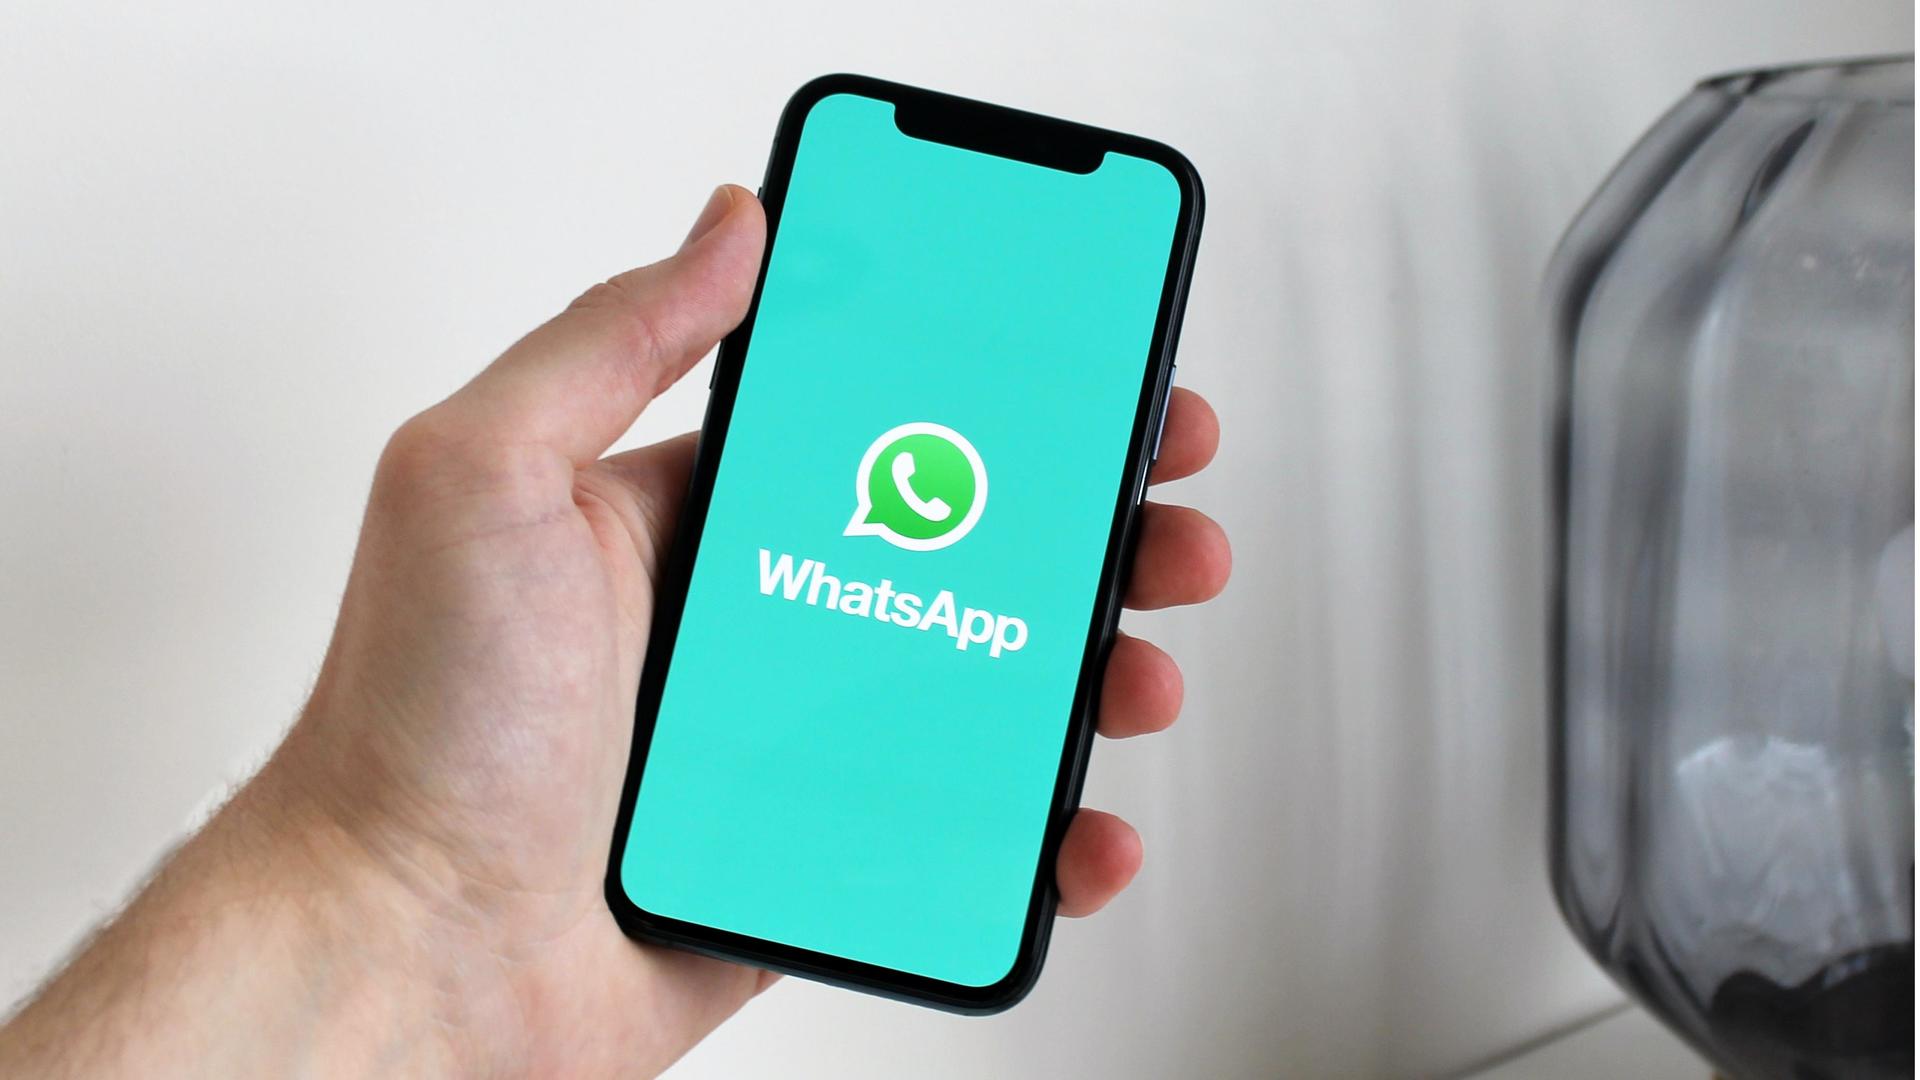 WhatsApp introduces voice transcriptions, side-by-side view, and seamless chat transfer